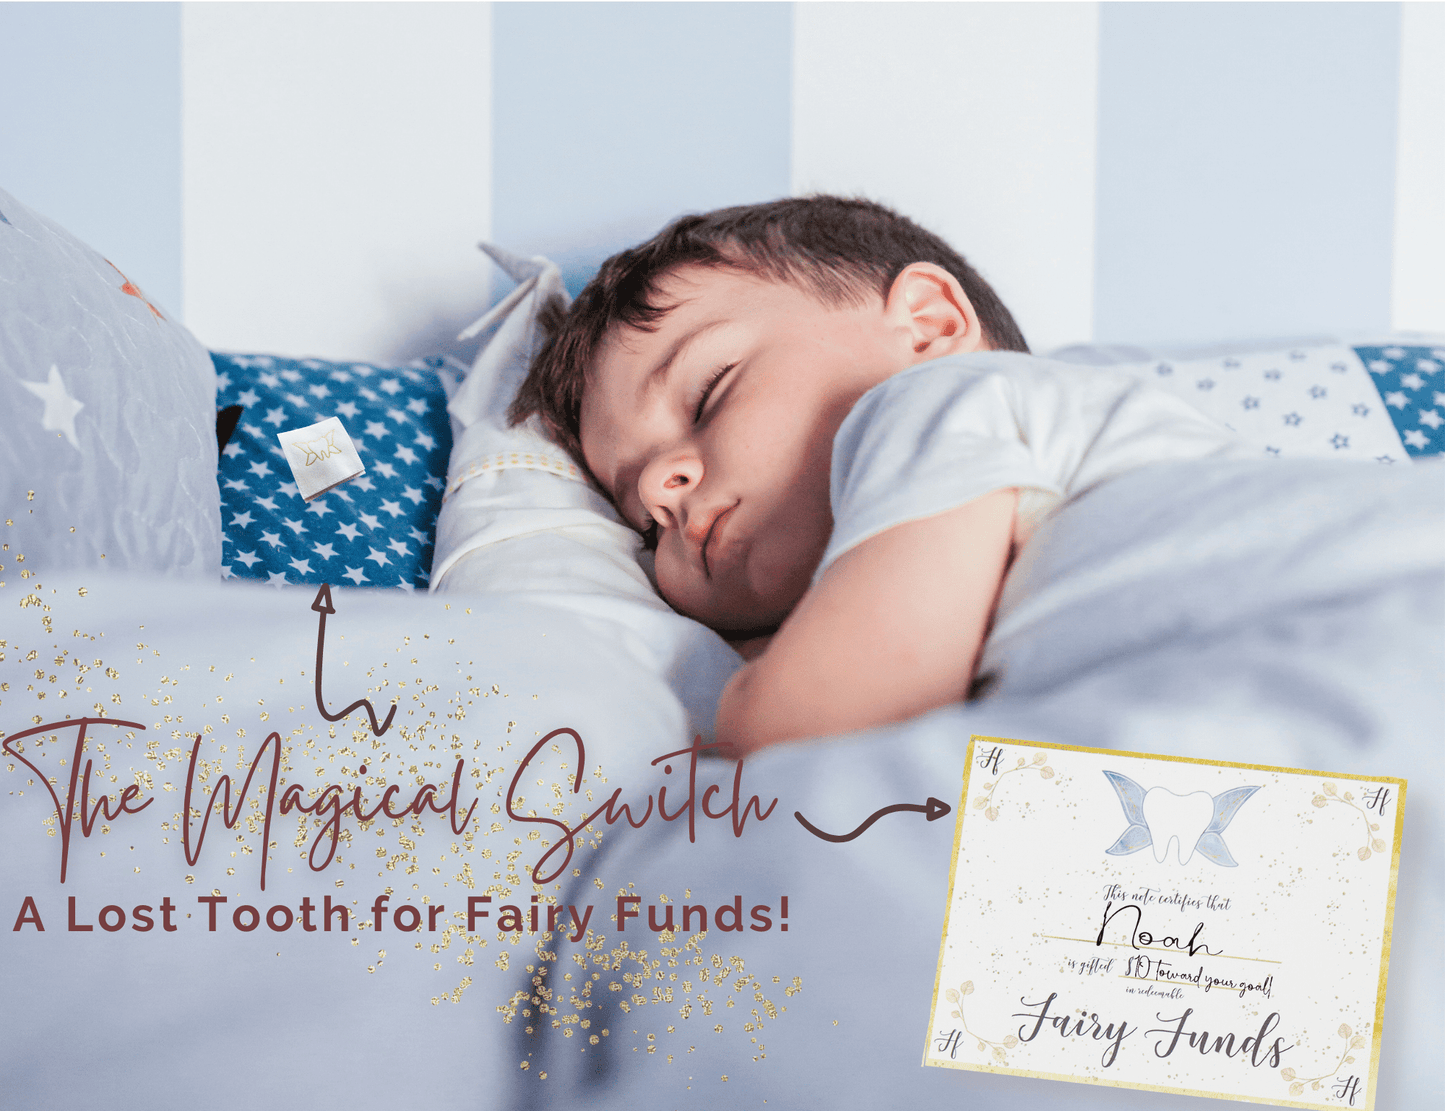 Customizable Tooth Fairy Certificates, a Cash Alternative, pack of 20